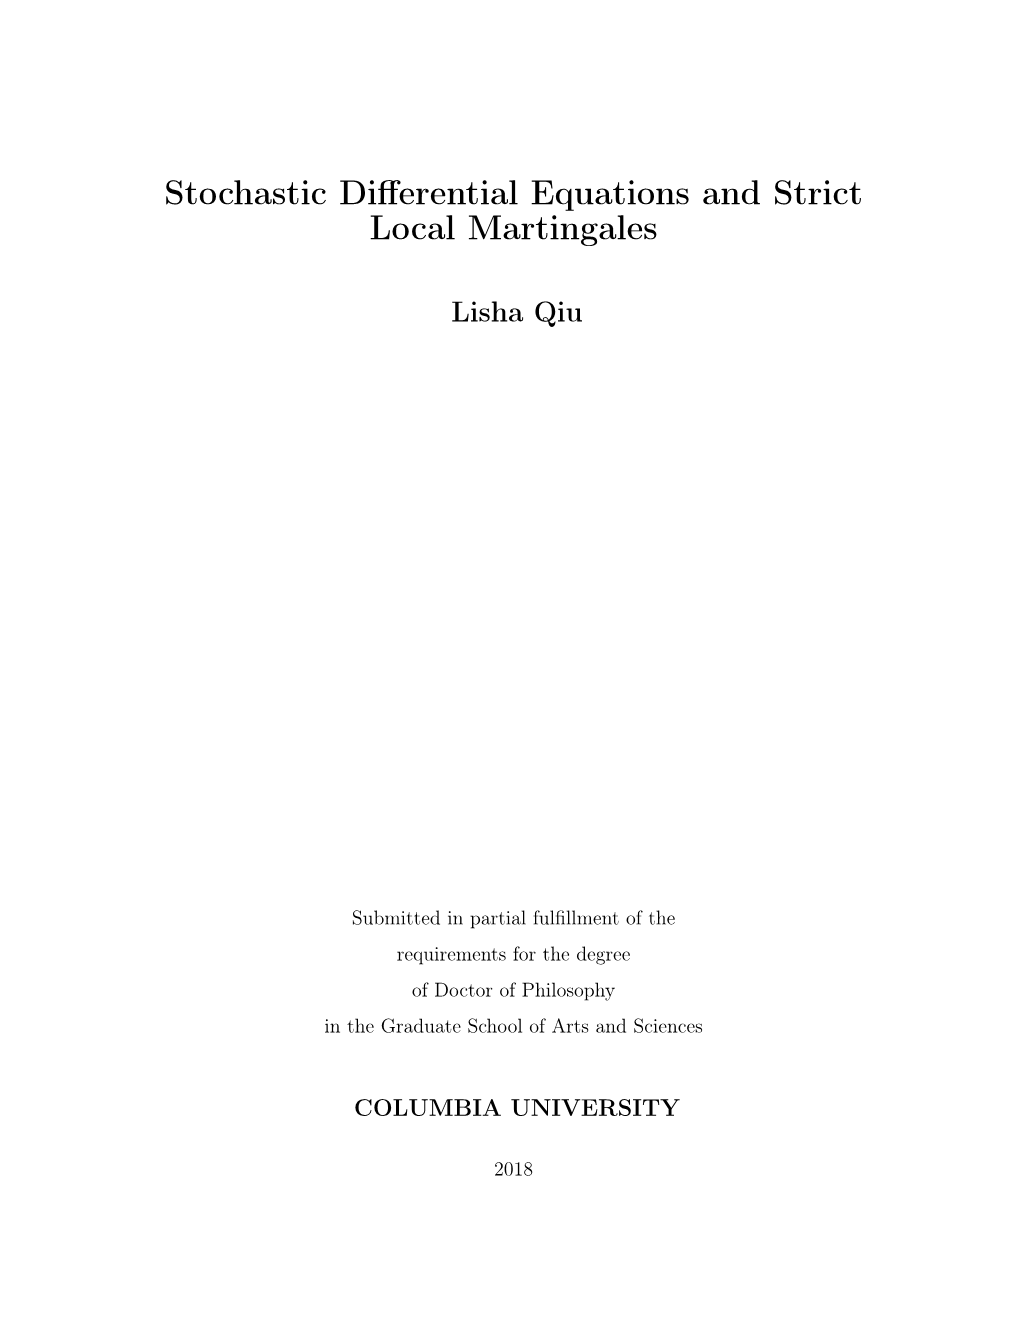 Stochastic Differential Equations and Strict Local Martingales